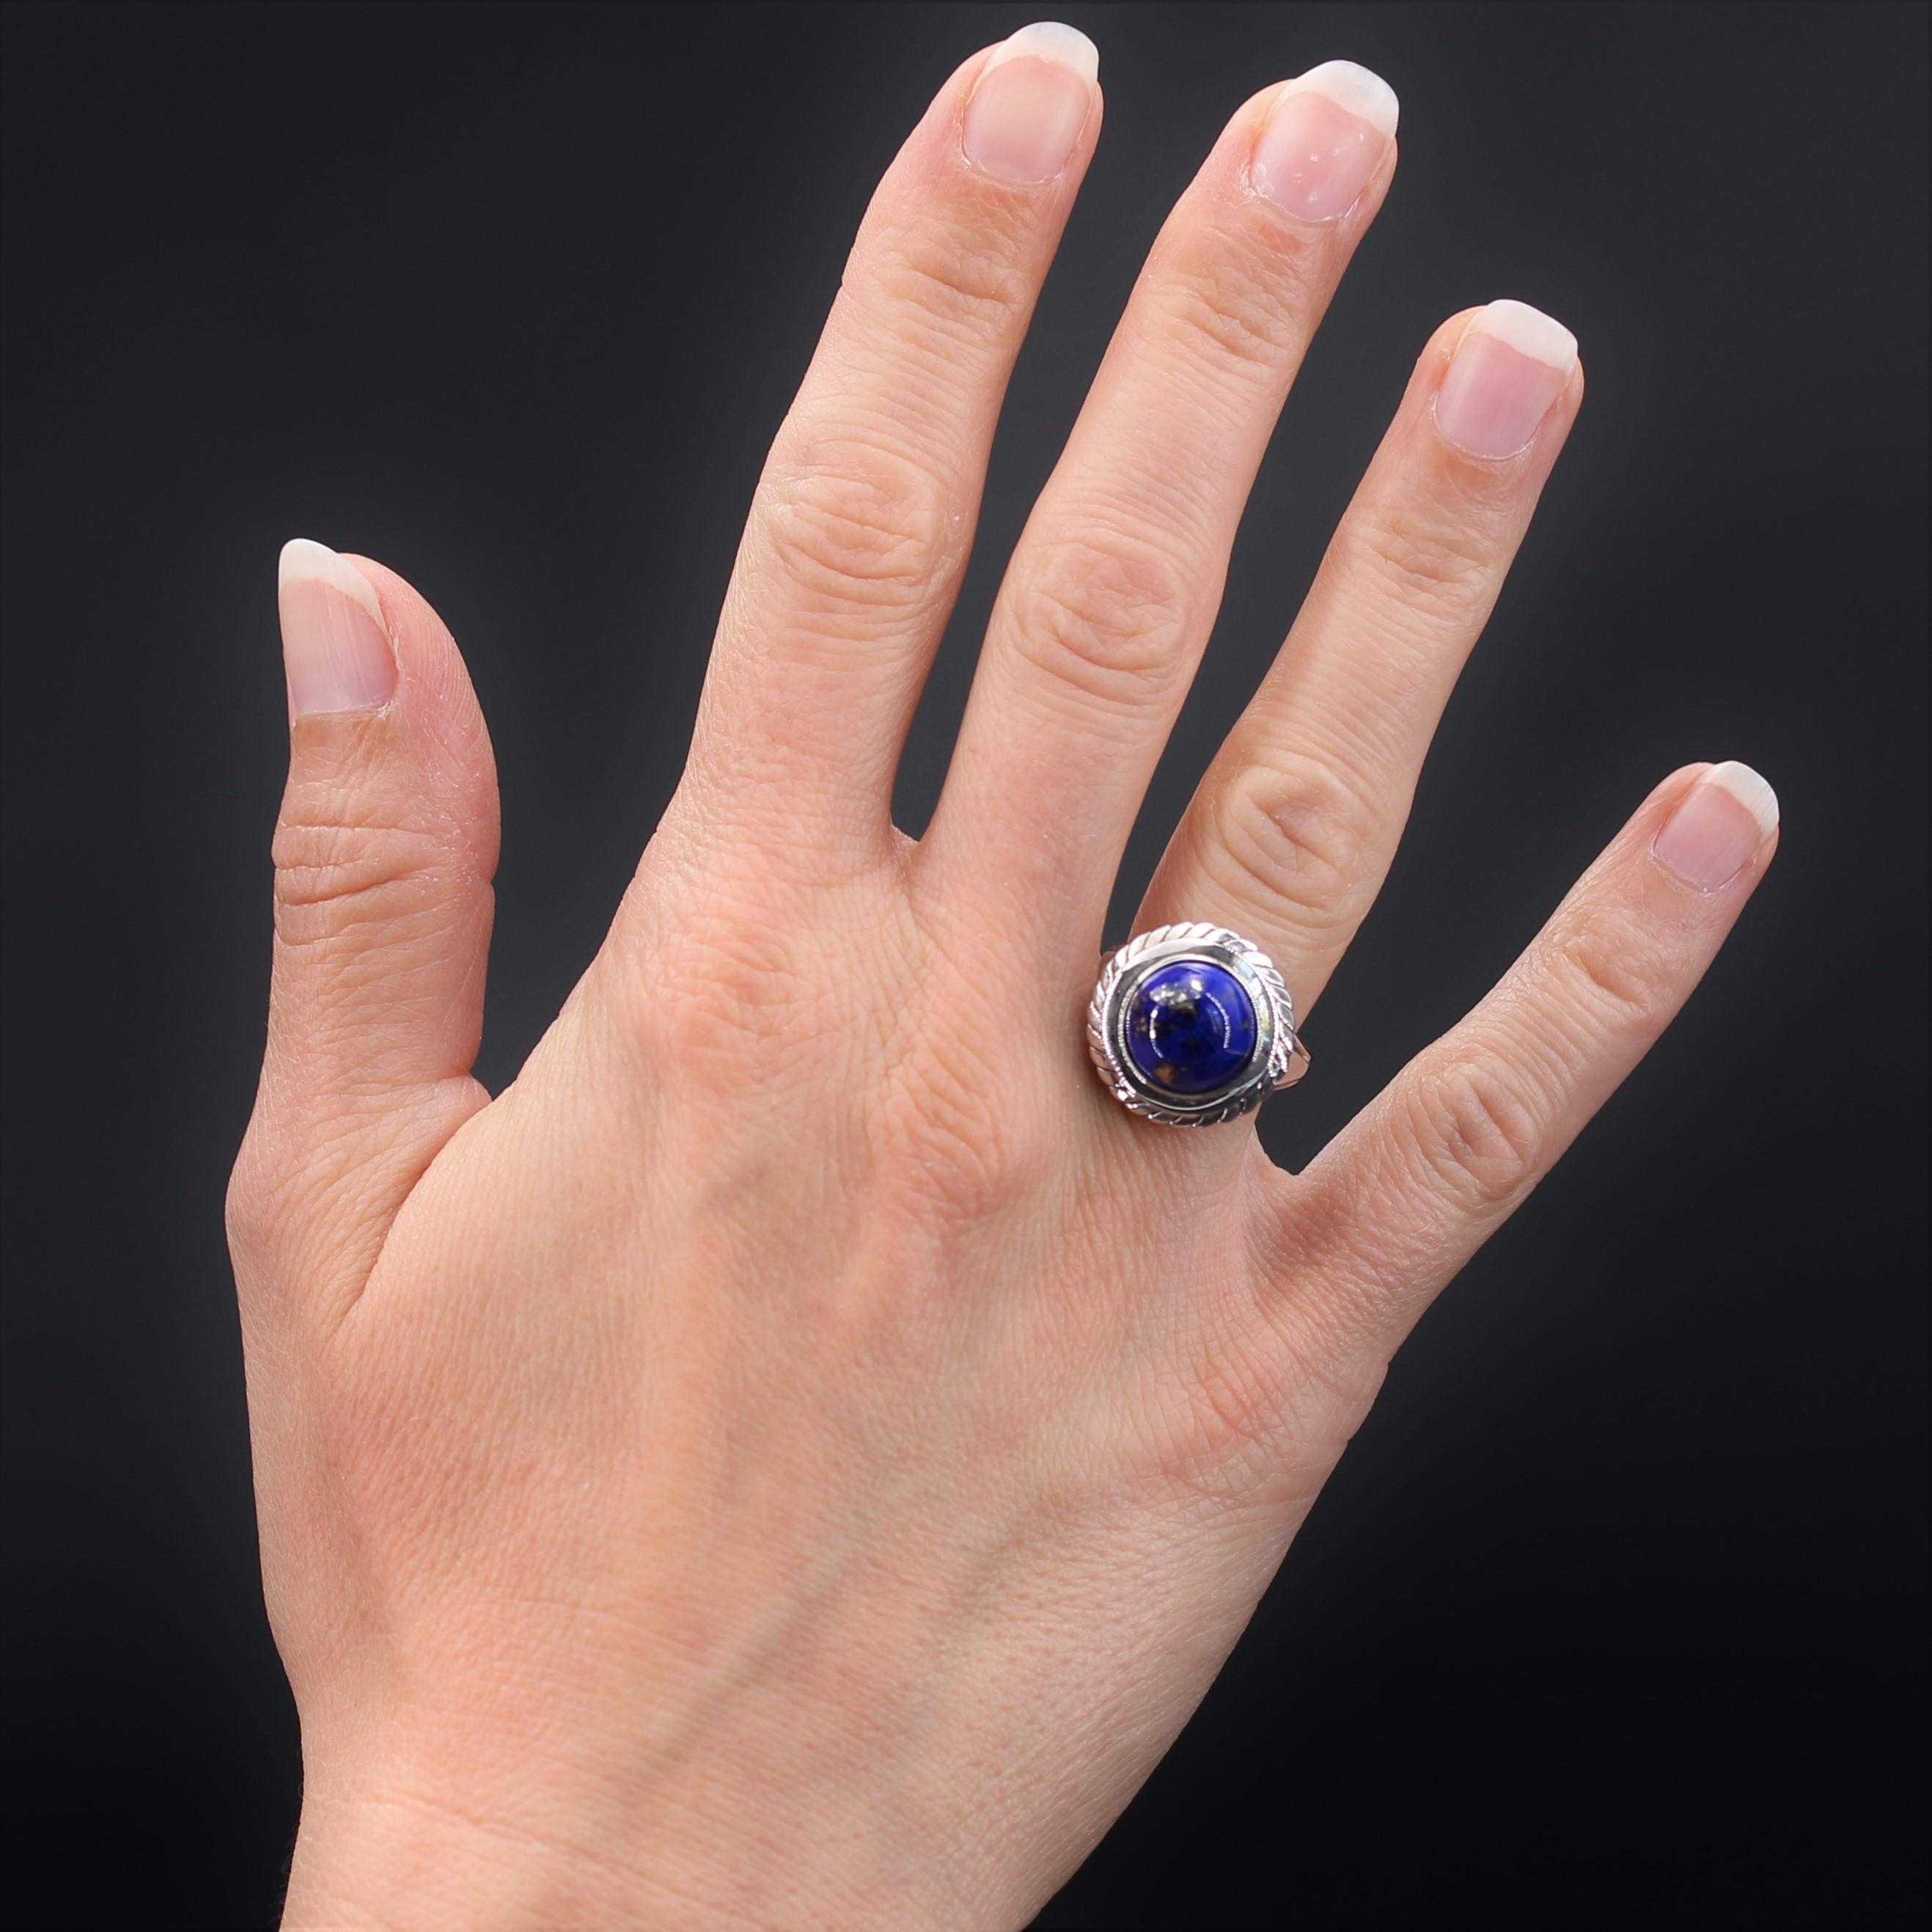 Ring in 18 karats white gold.
Round in shape, it is set with a lapis lazuli cabochon in a closed setting surrounded by a shiny smooth gold circle and a chiseled second circle. The basket is perforated and the departure of the double ring is set with